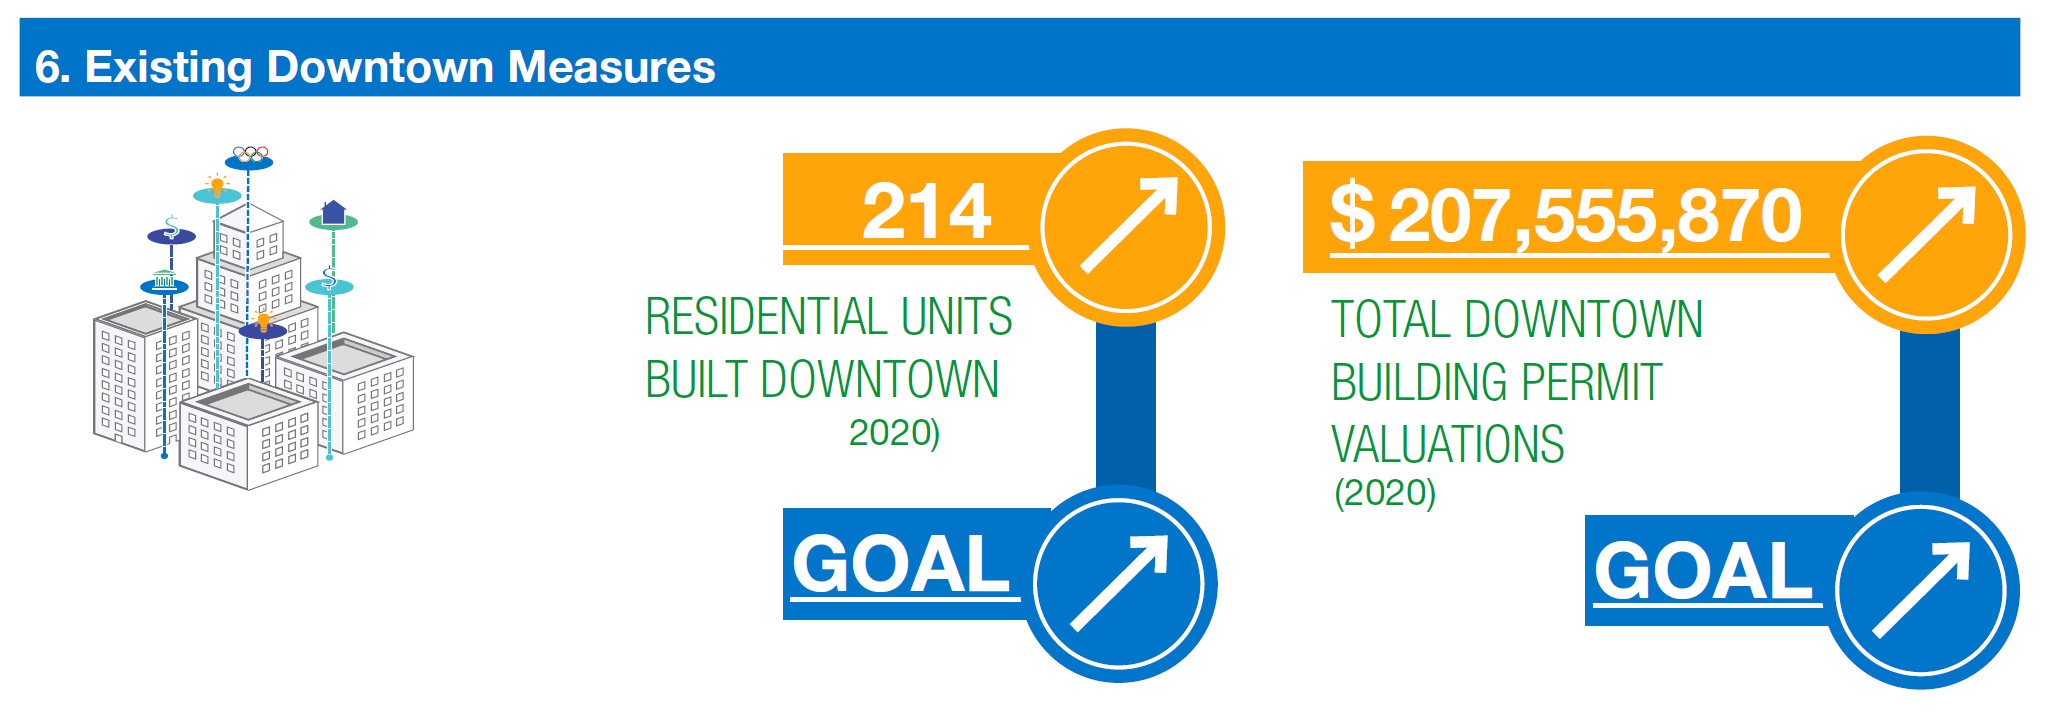 existing downtown measures. residential units built downtown. 214. trending up. goal to increase. total downtown building permit valuations $207,555,870. trending up. goal to increase